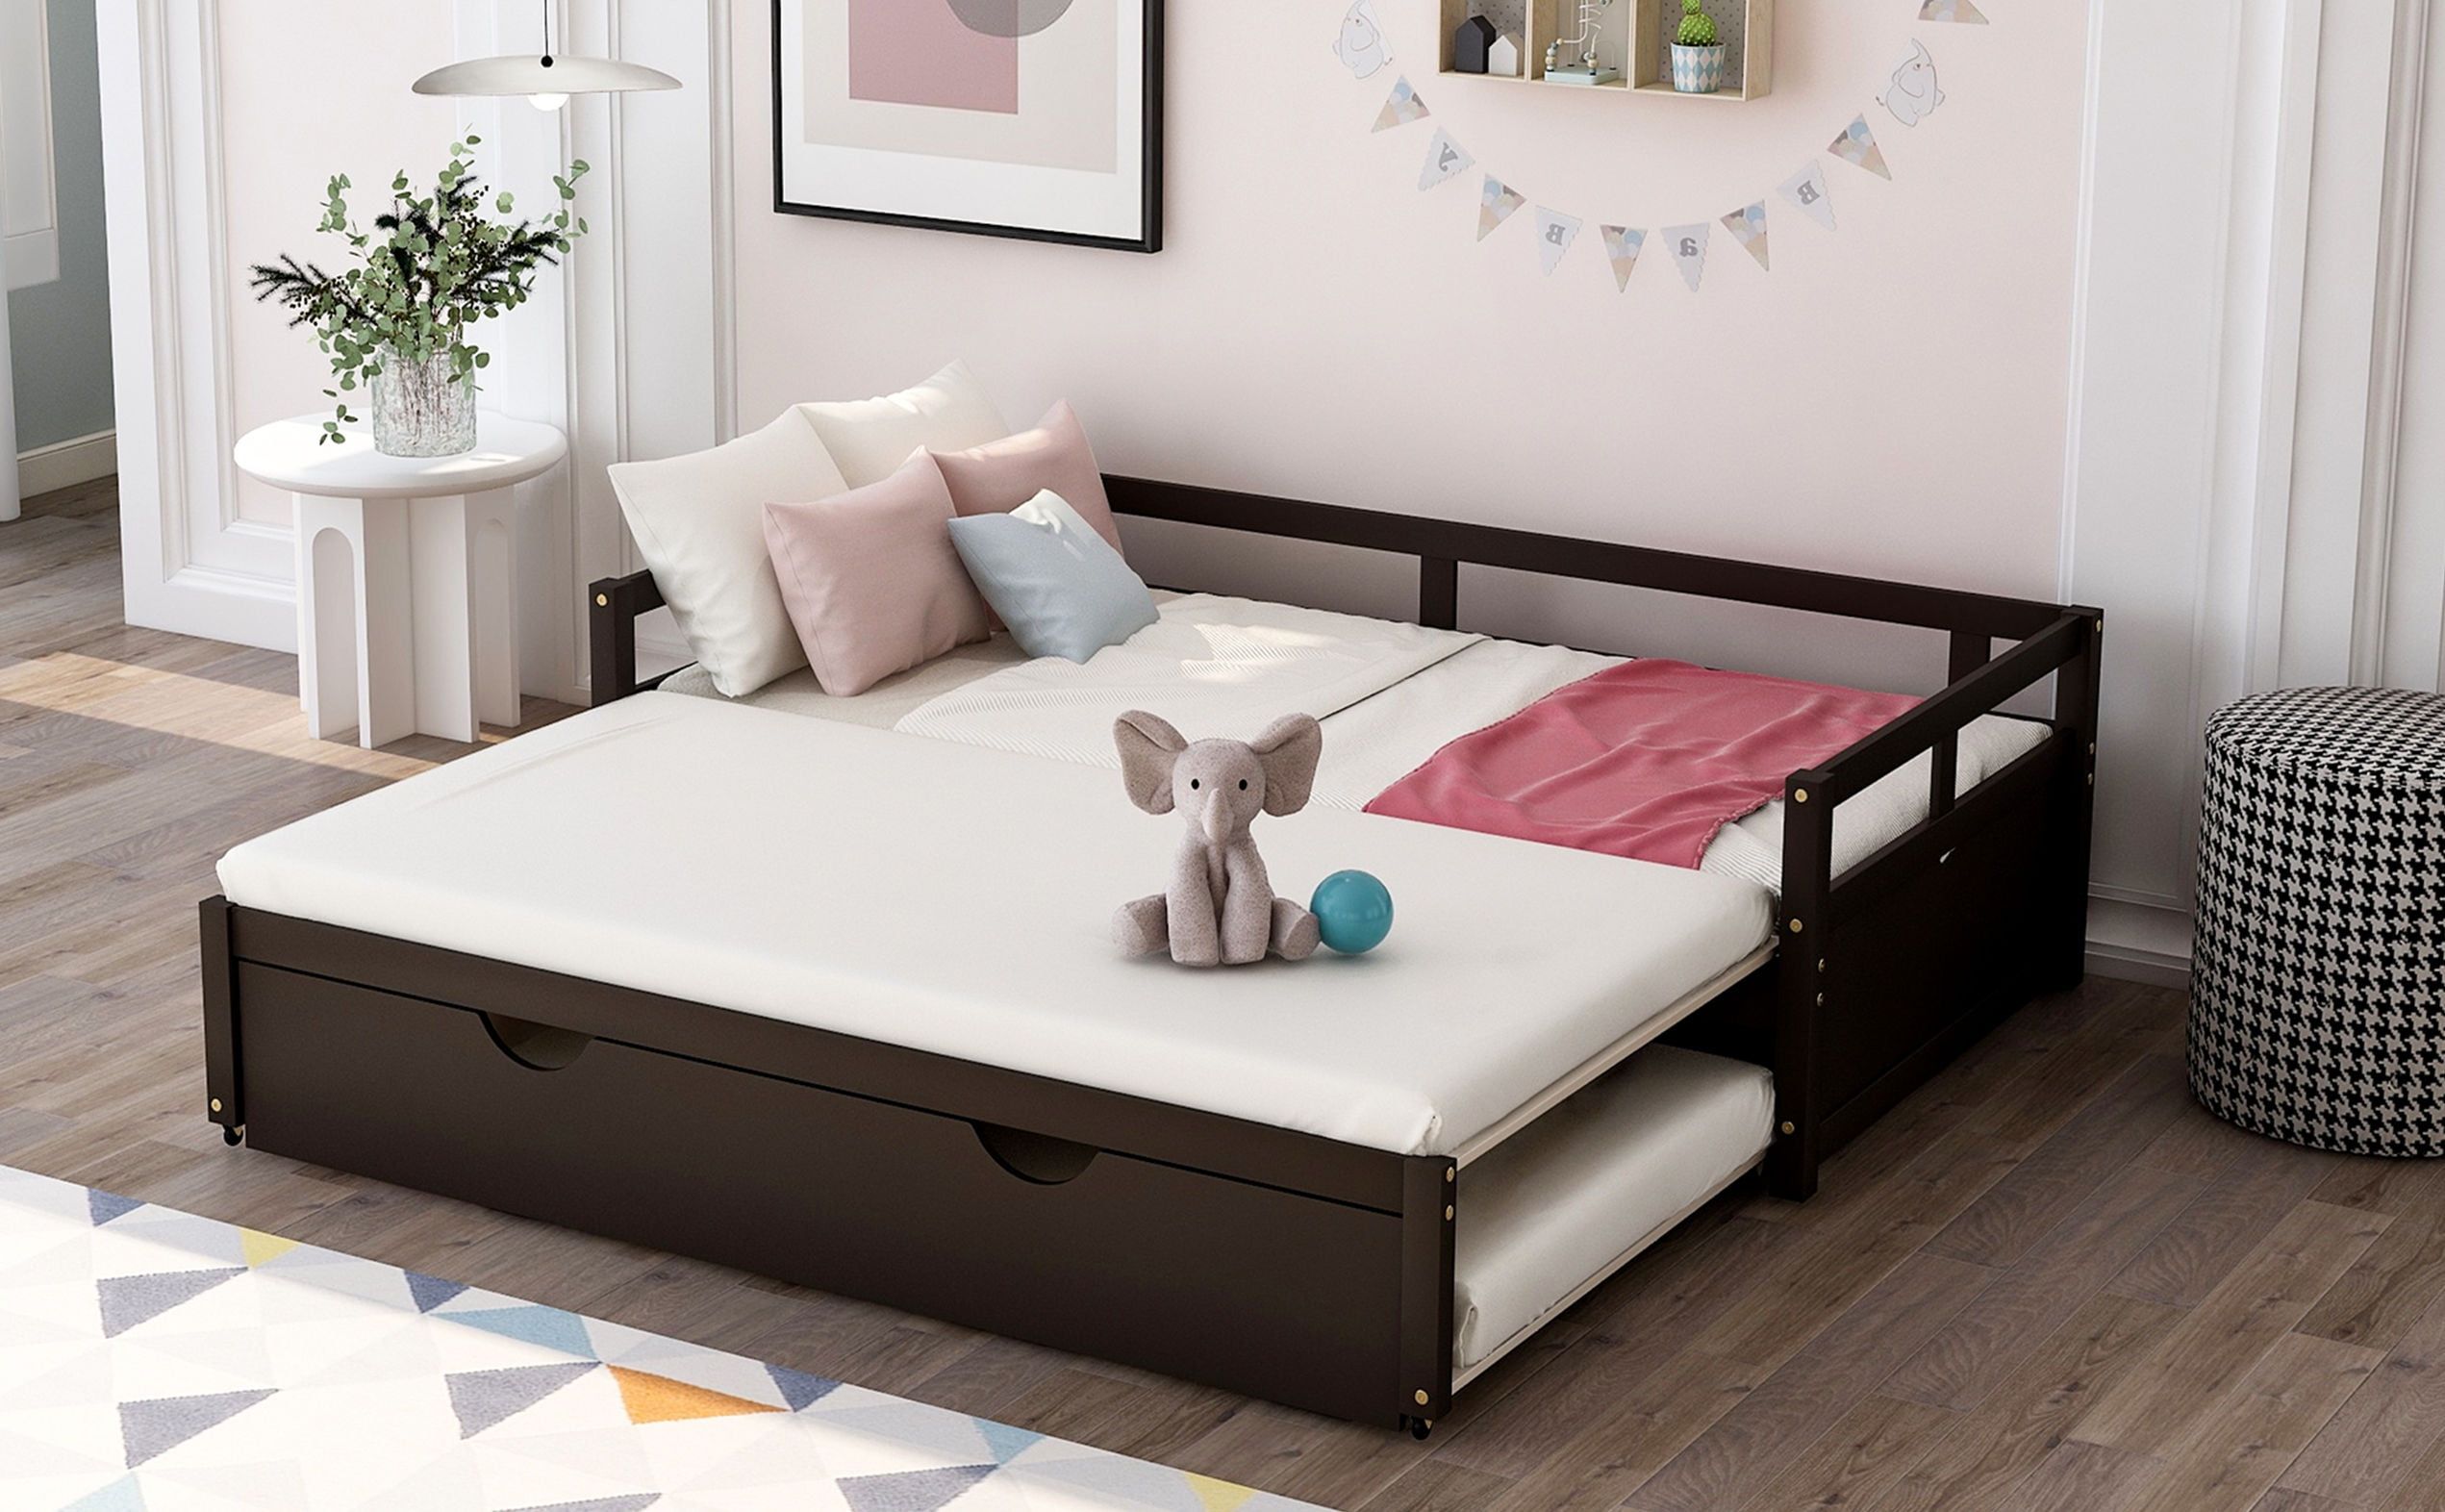 Extending Daybed With Trundle, Wooden Daybed With Trundle, Sofa Bed Pertaining To Children's Sofa Beds (Gallery 15 of 20)